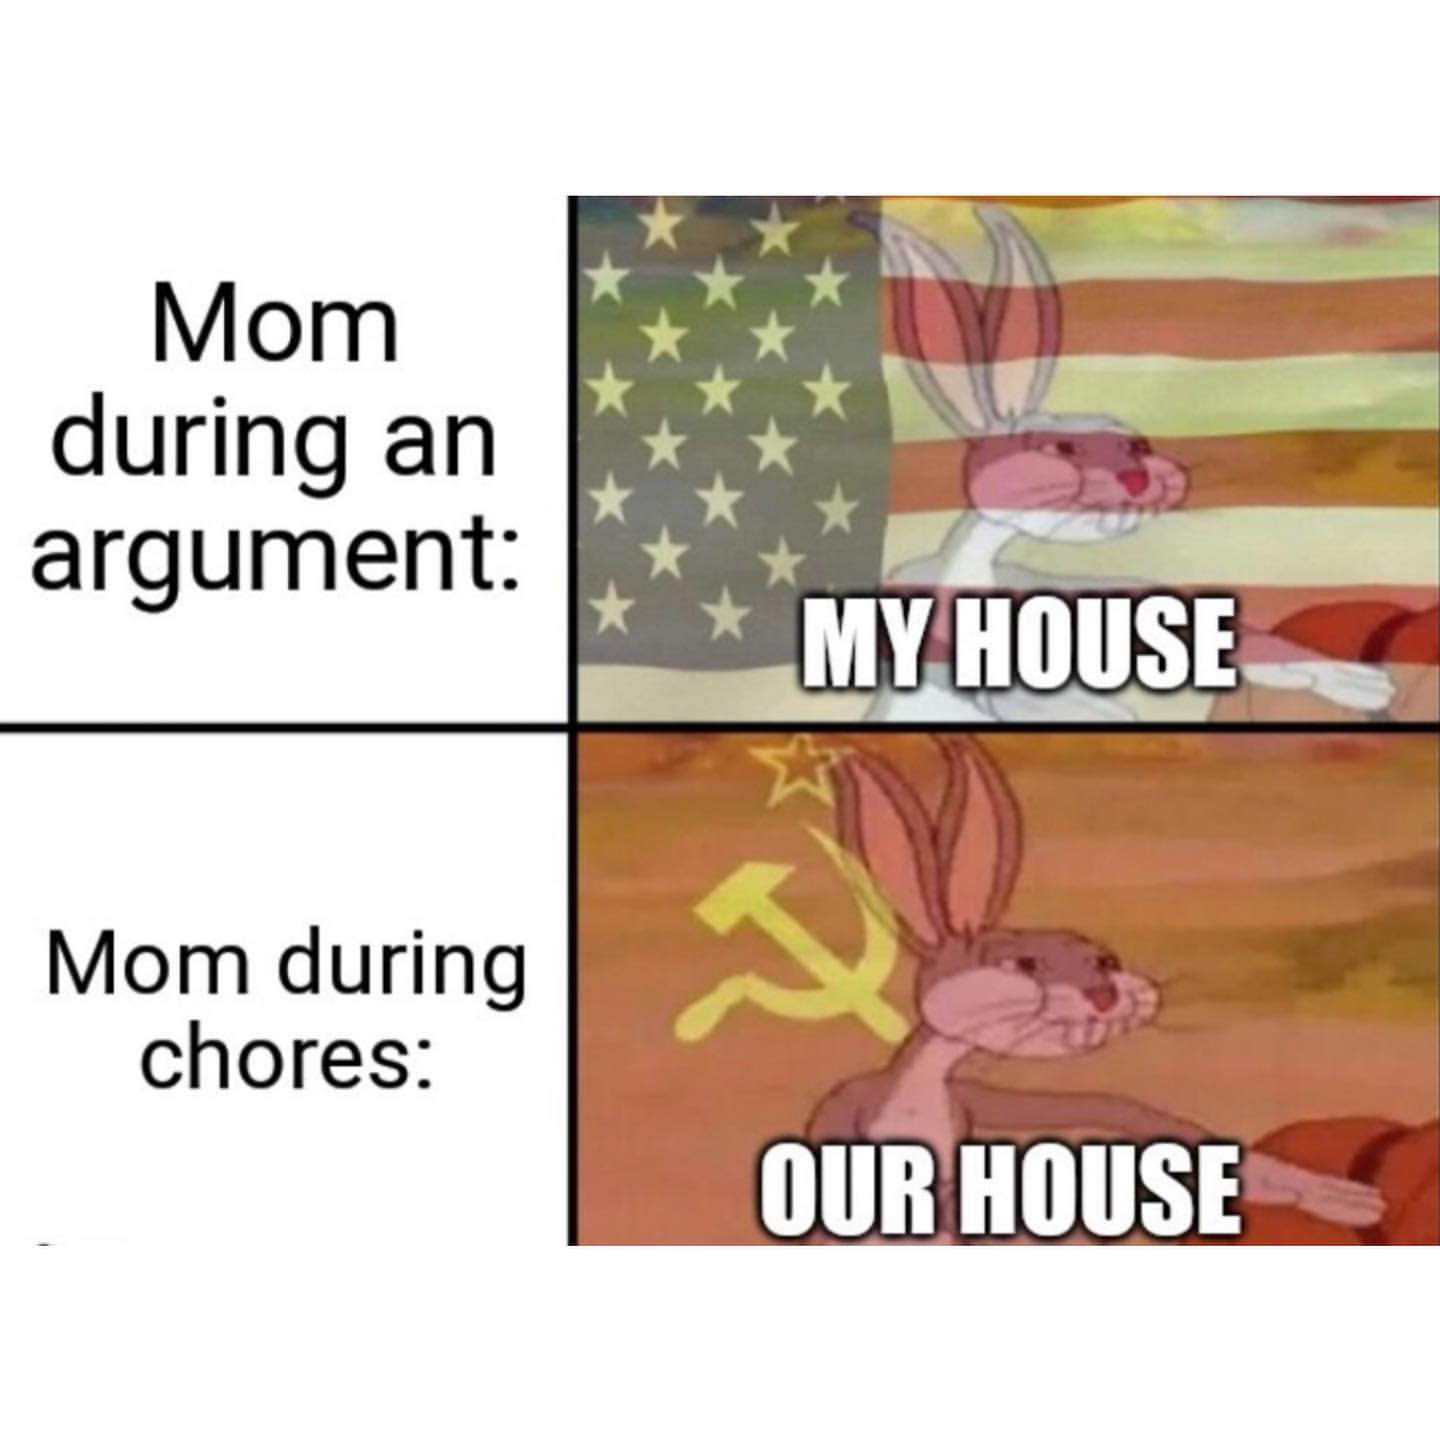 Mom during an argument: My house.  Mom during chores: Our house.